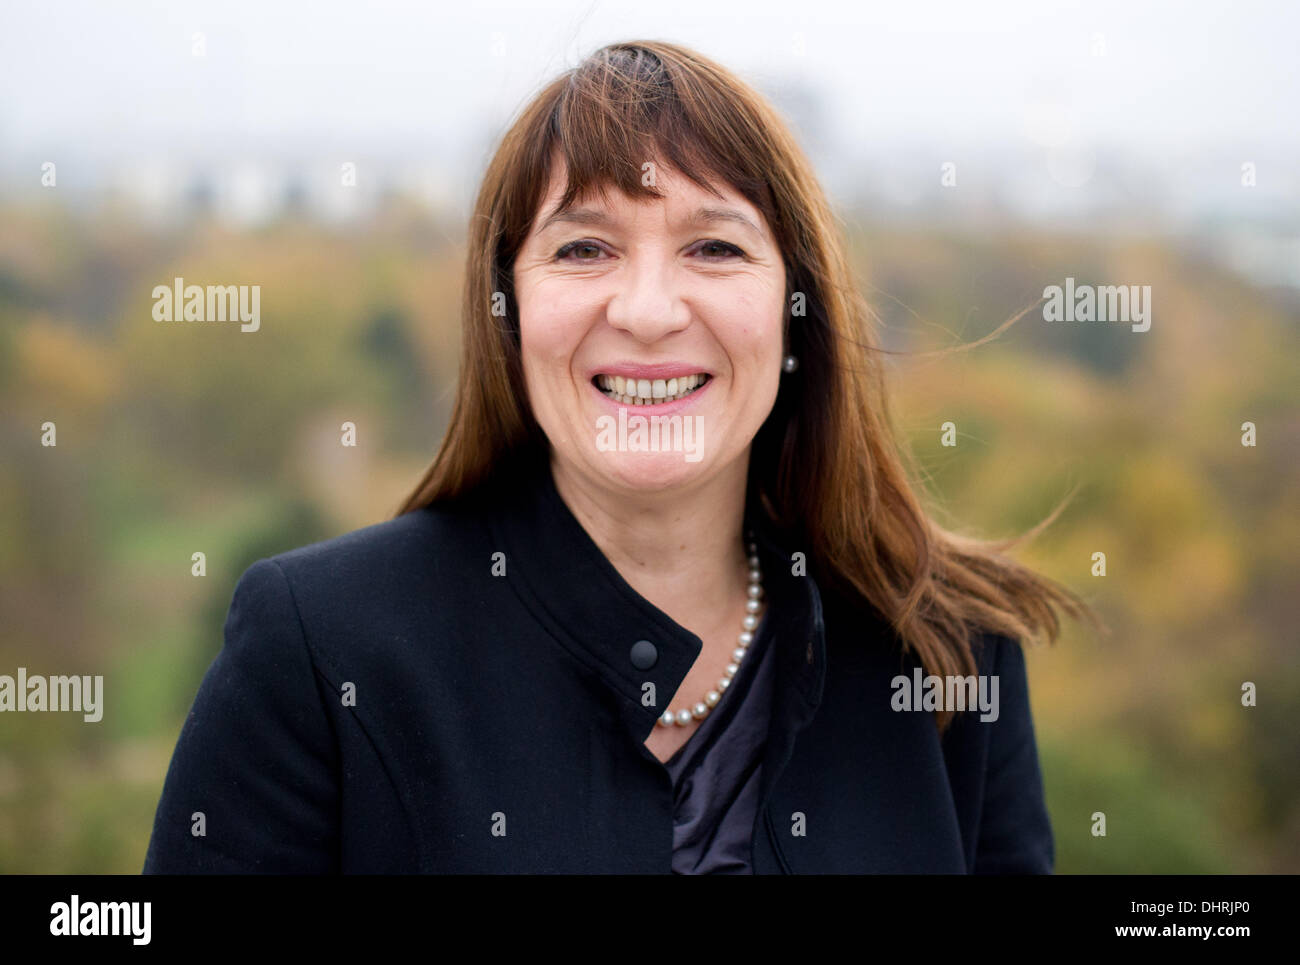 Berlin, Germany. 13th Nov, 2013. The new chief manager of the Federal Association of Public Banks in Germany (Bundesverband Oeffentlicher Banken , VOeB), Liane Buchholz, stands on the roof terrace of the VOeB in Berlin, Germany, 13 November 2013. Photo: Ole Spata/dpa/Alamy Live News Stock Photo